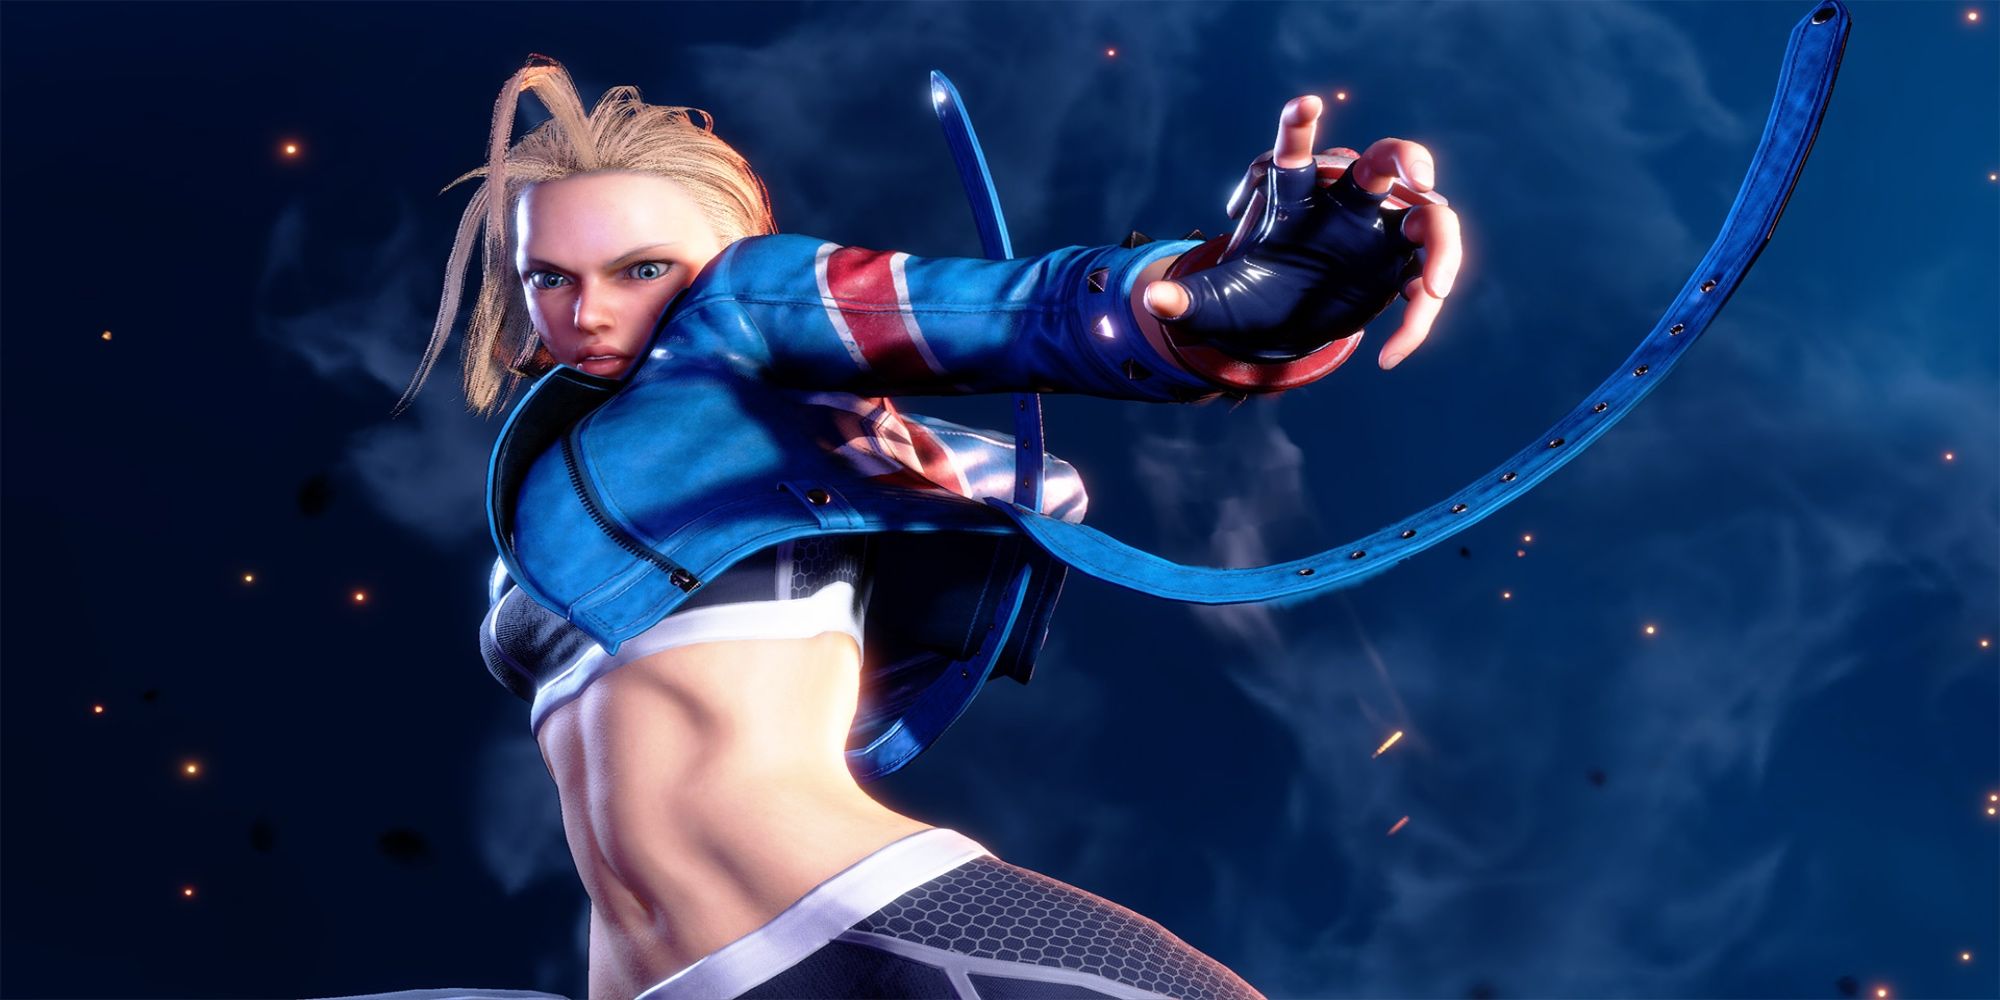 Cammy startles her enemies with her moves